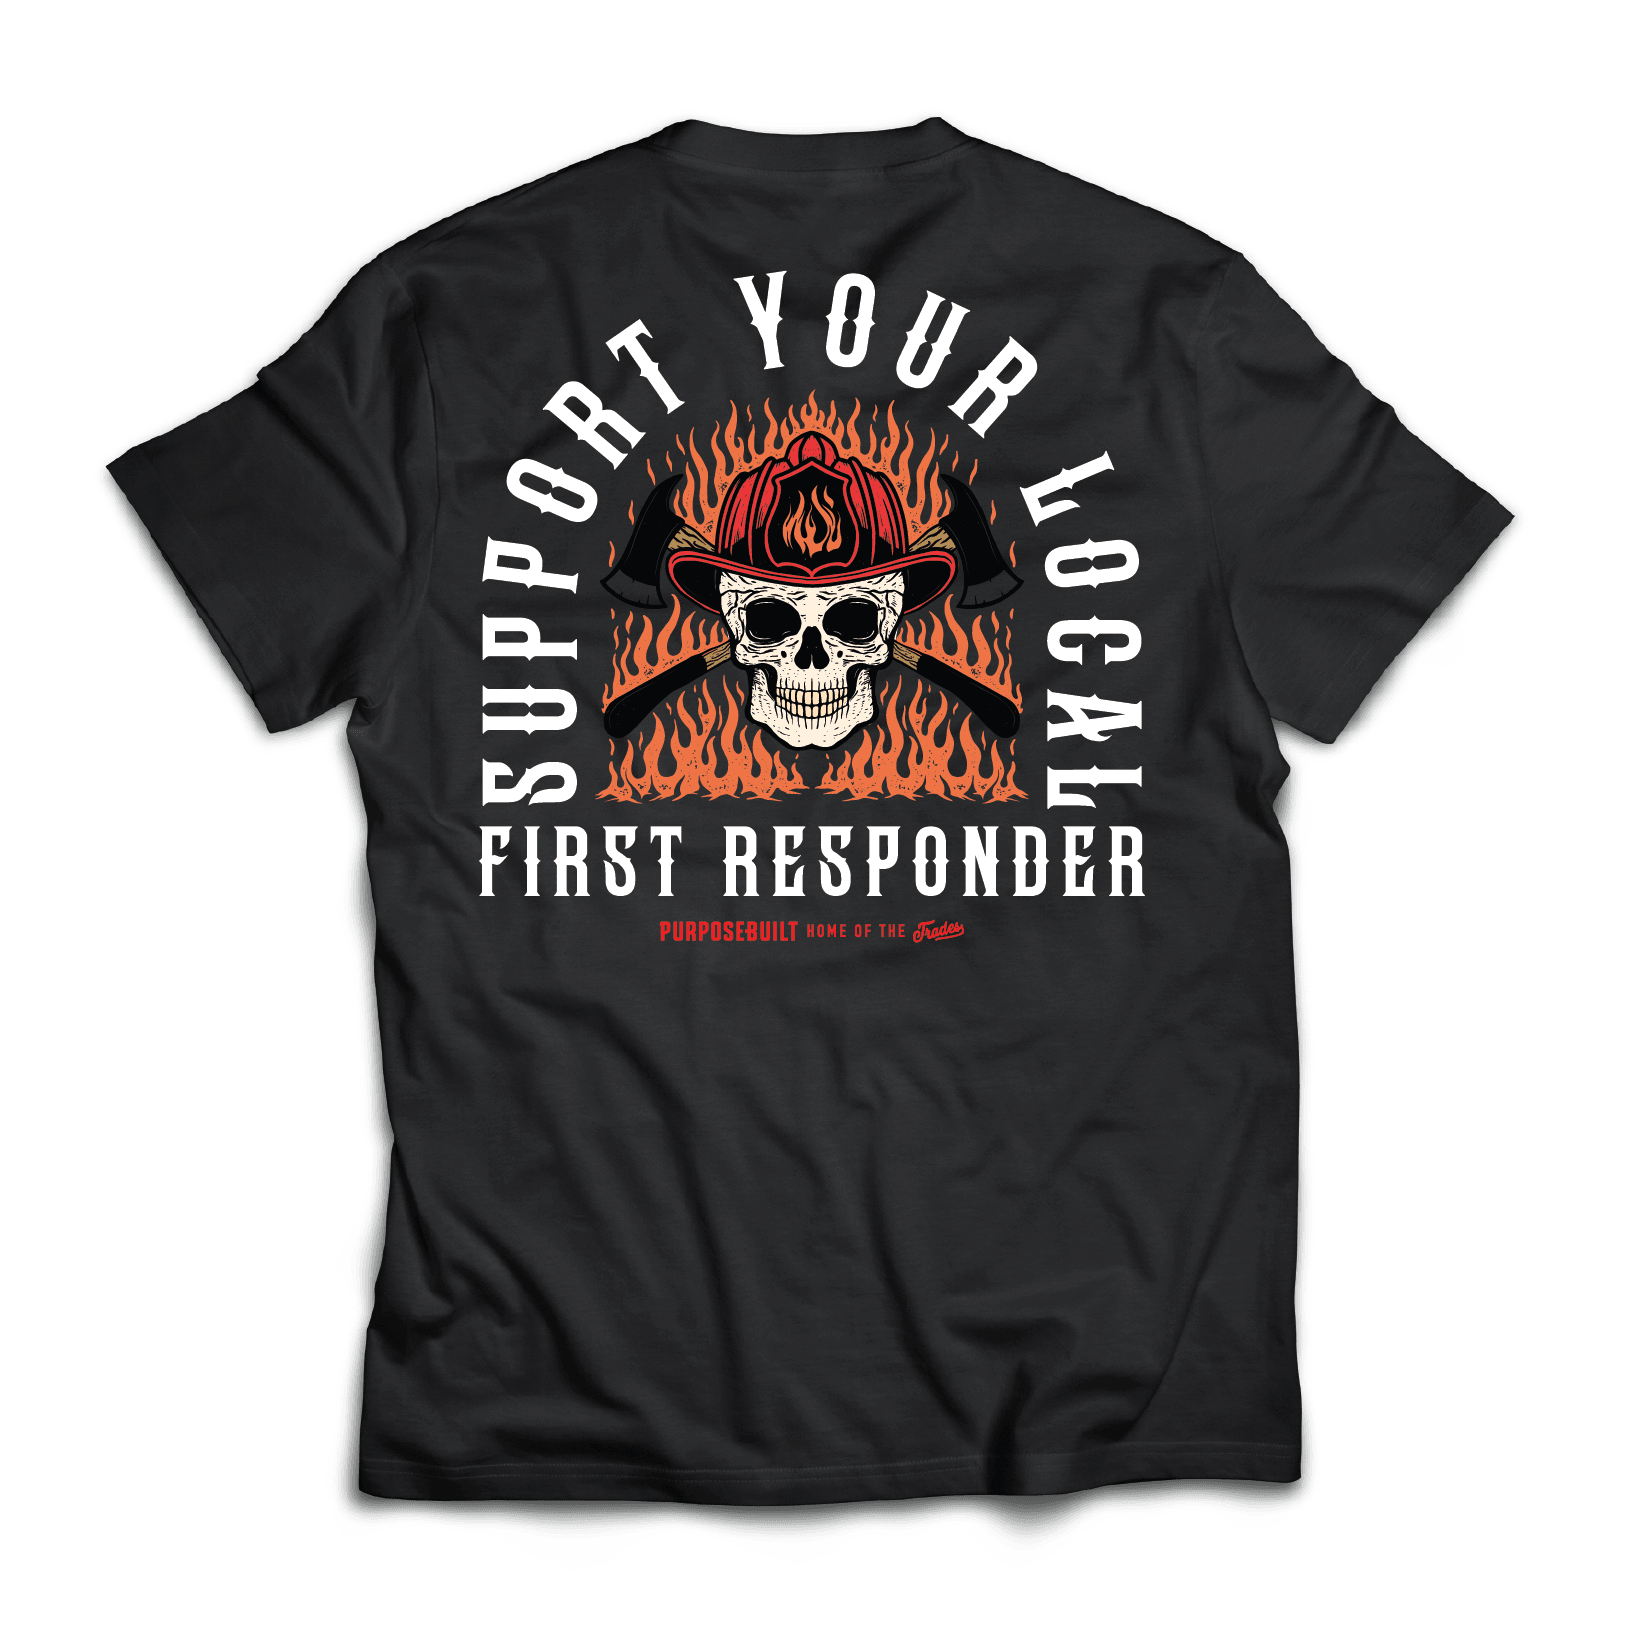 Support Your Local First Responder Tee. Black